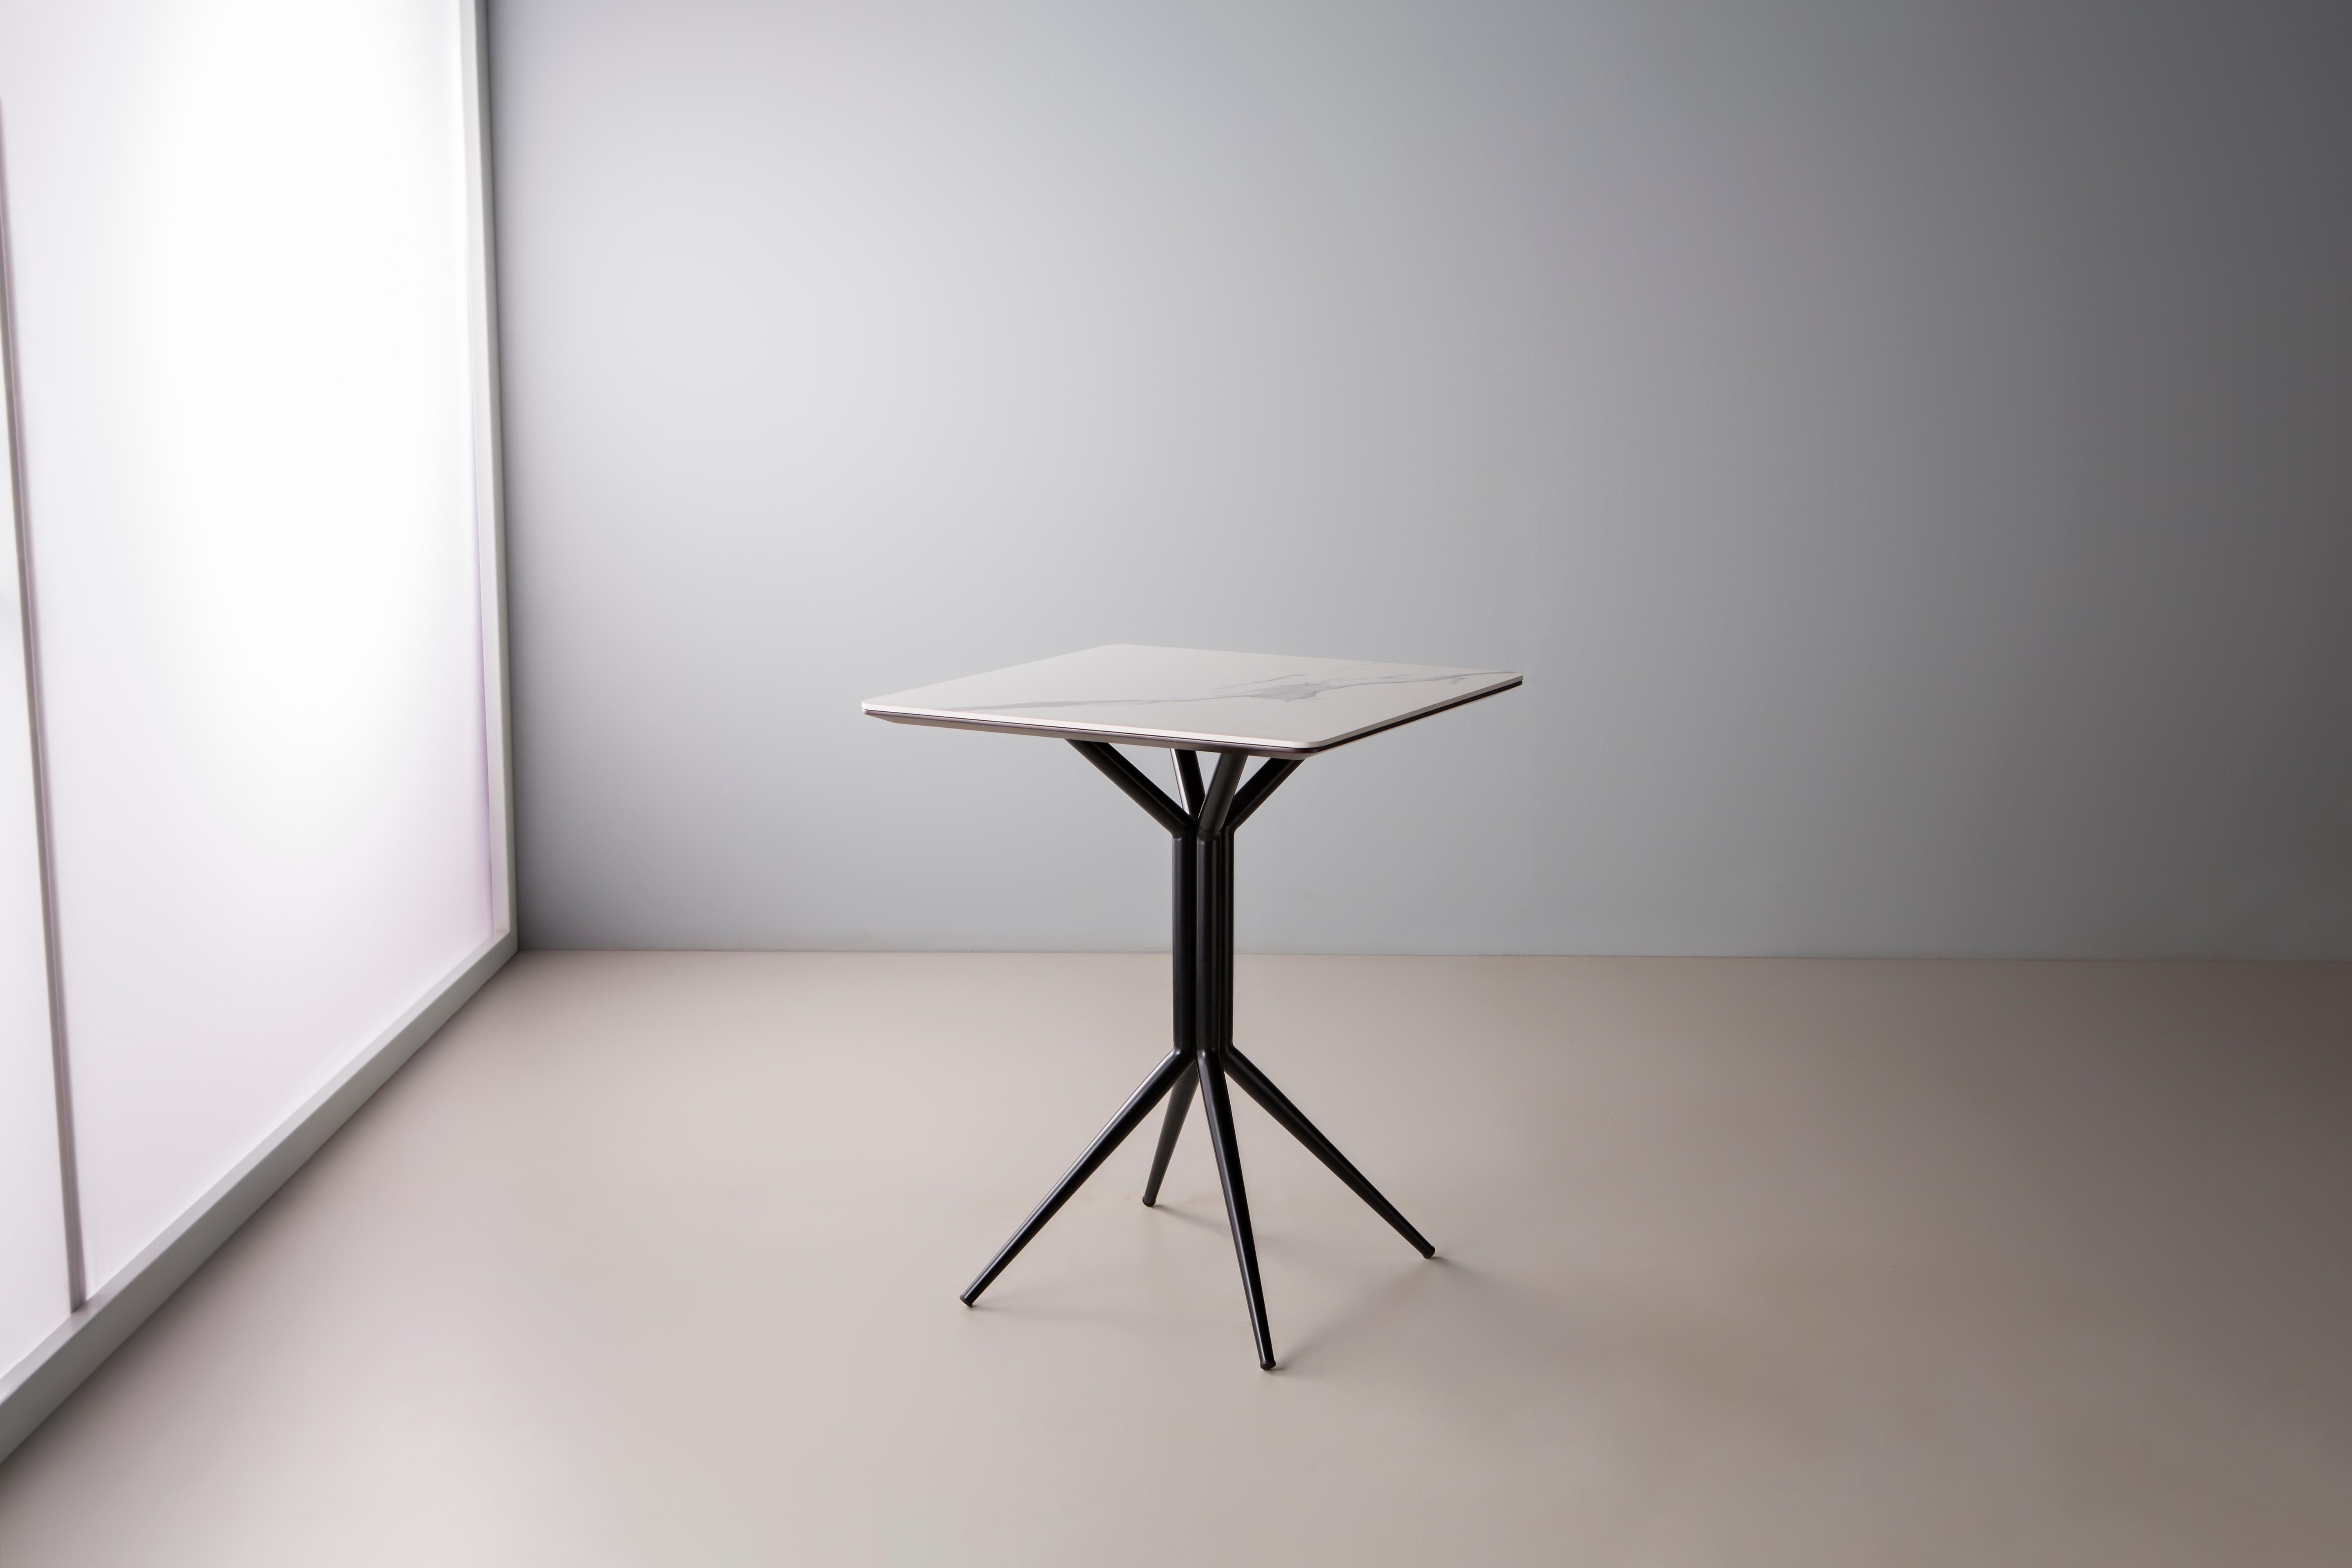 Max 4 Table by Doimo Brasil
Dimensions: W 60 x D 60 x H 75 cm 
Materials: Base: Paint, Top: Lacquer, Reconstituted stone. 

Also available in W 70 x D 70, W 70 x D 70, W 80 x D 80, W 90 x D 90 cm. Please contact us.

With the intention of providing